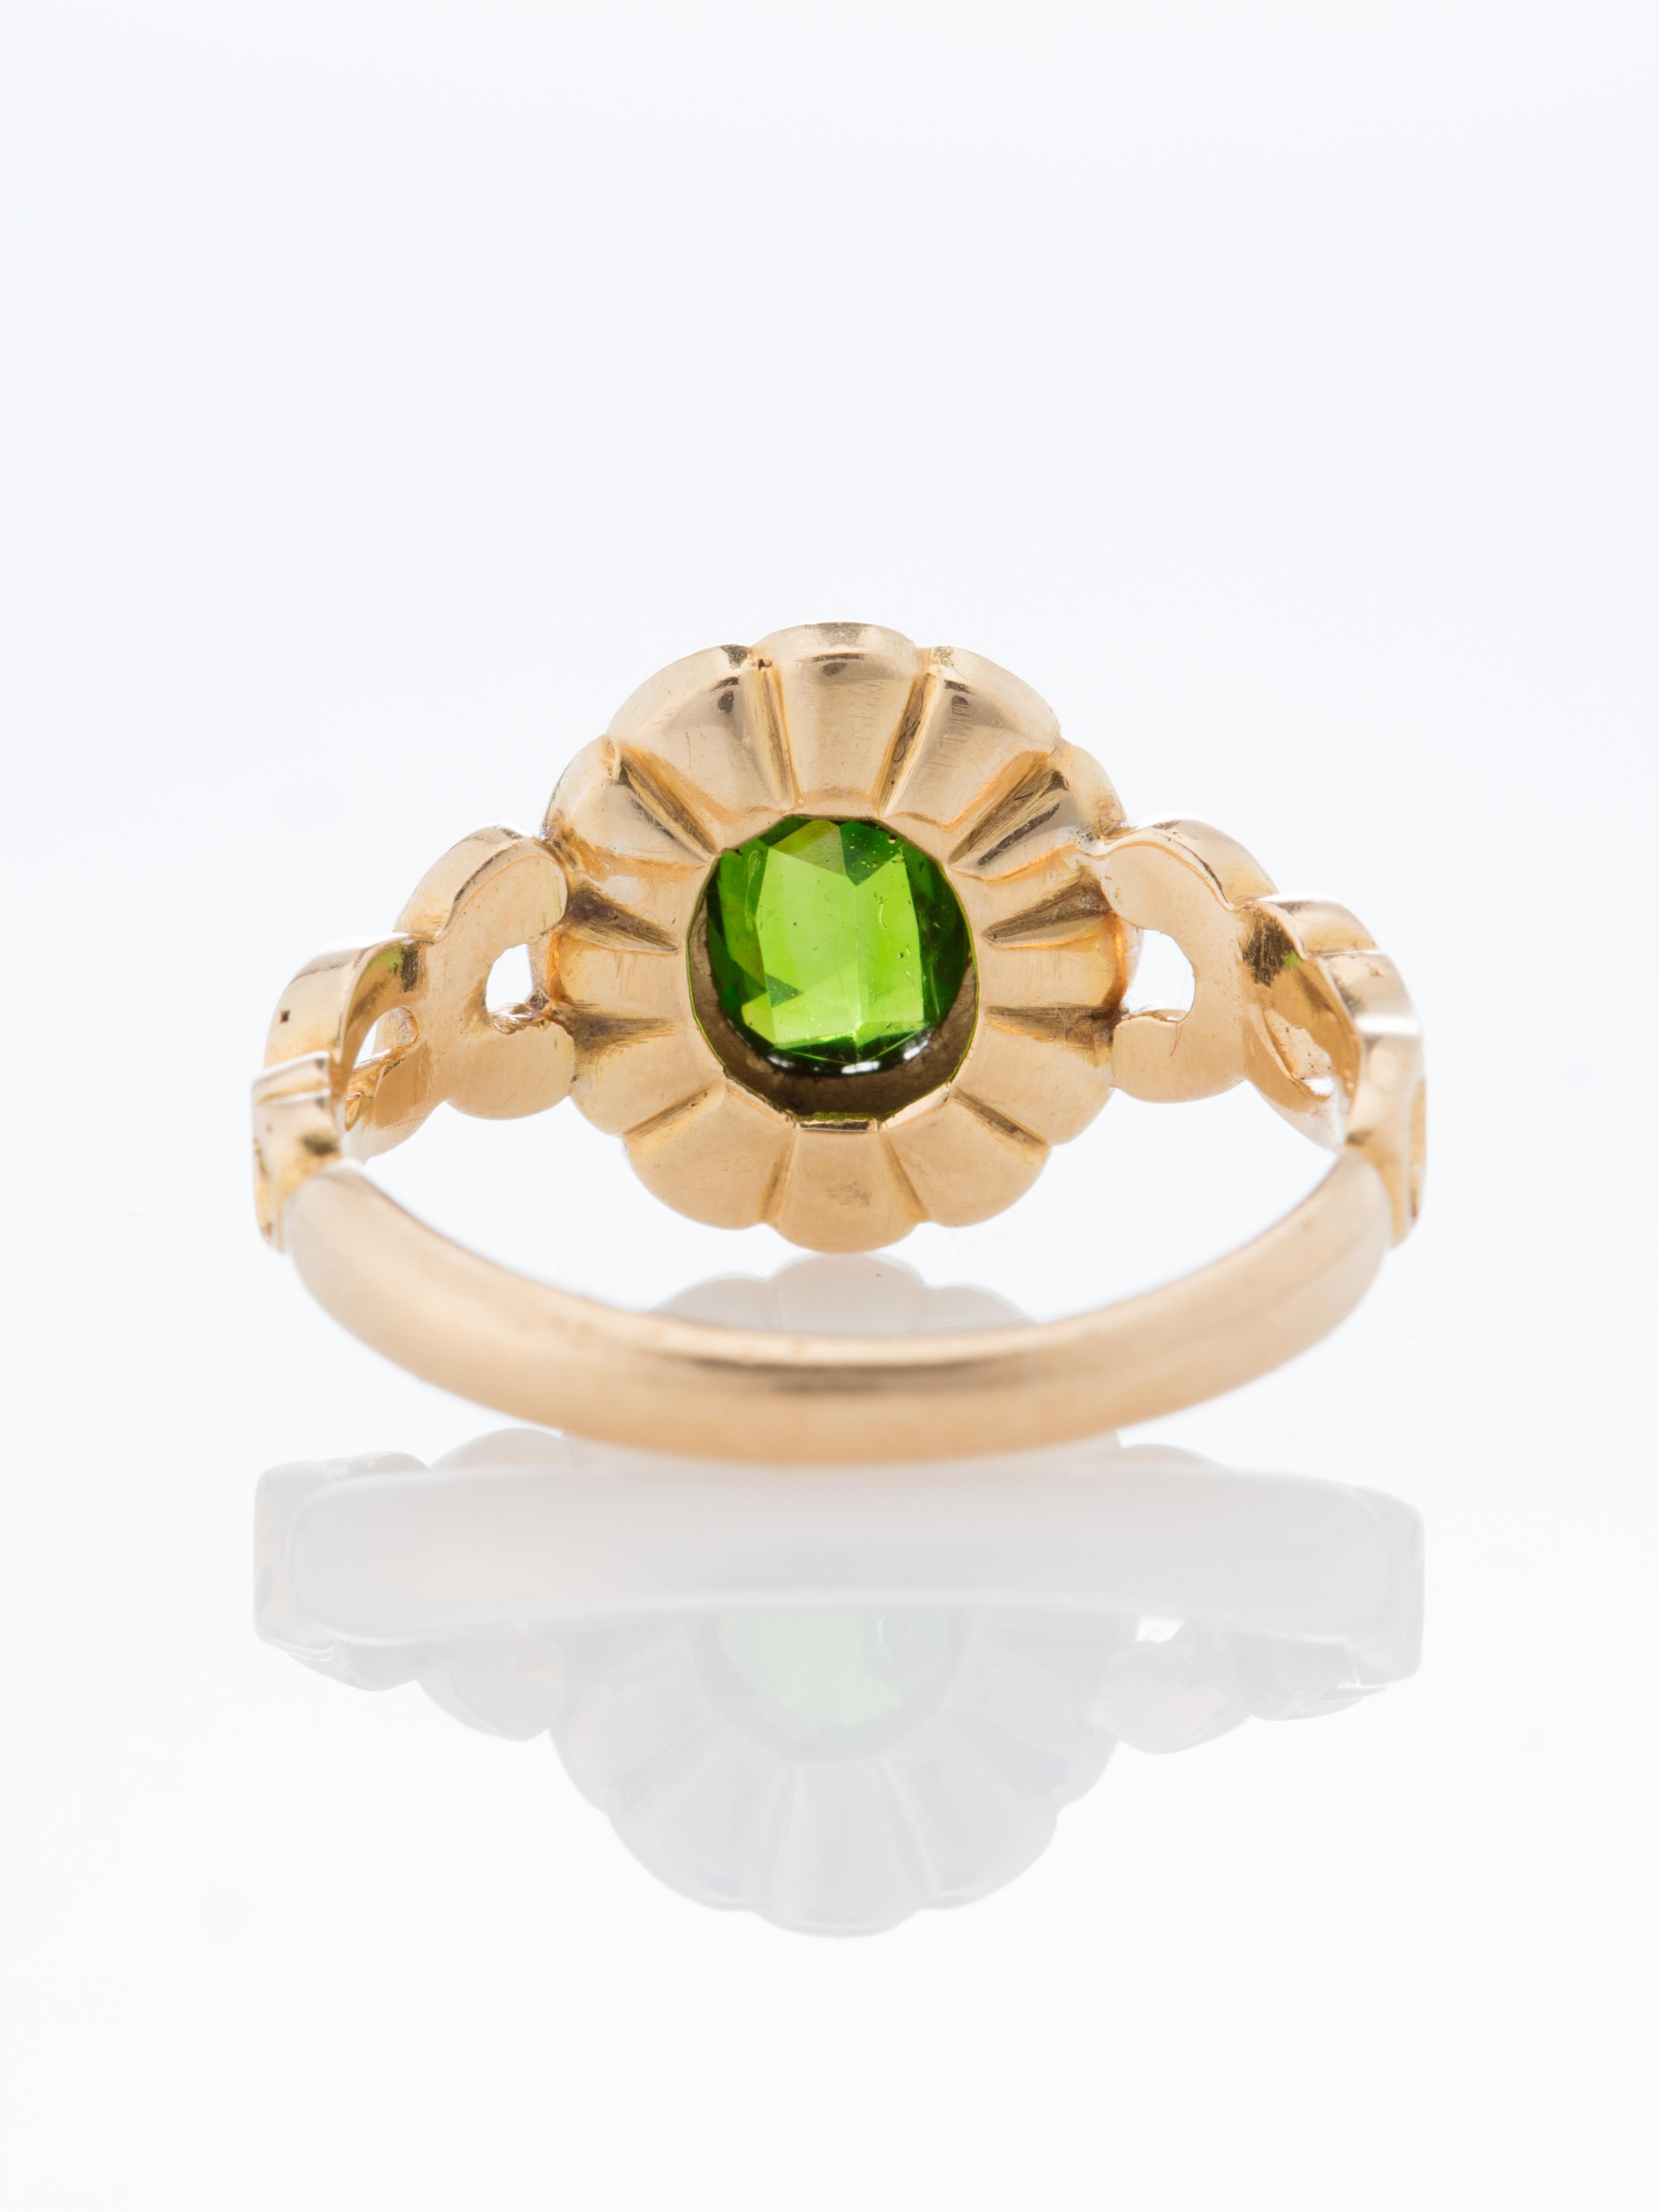 Victorian Demantoid Garnet and Natural Pearls Cluster Ring For Sale 1